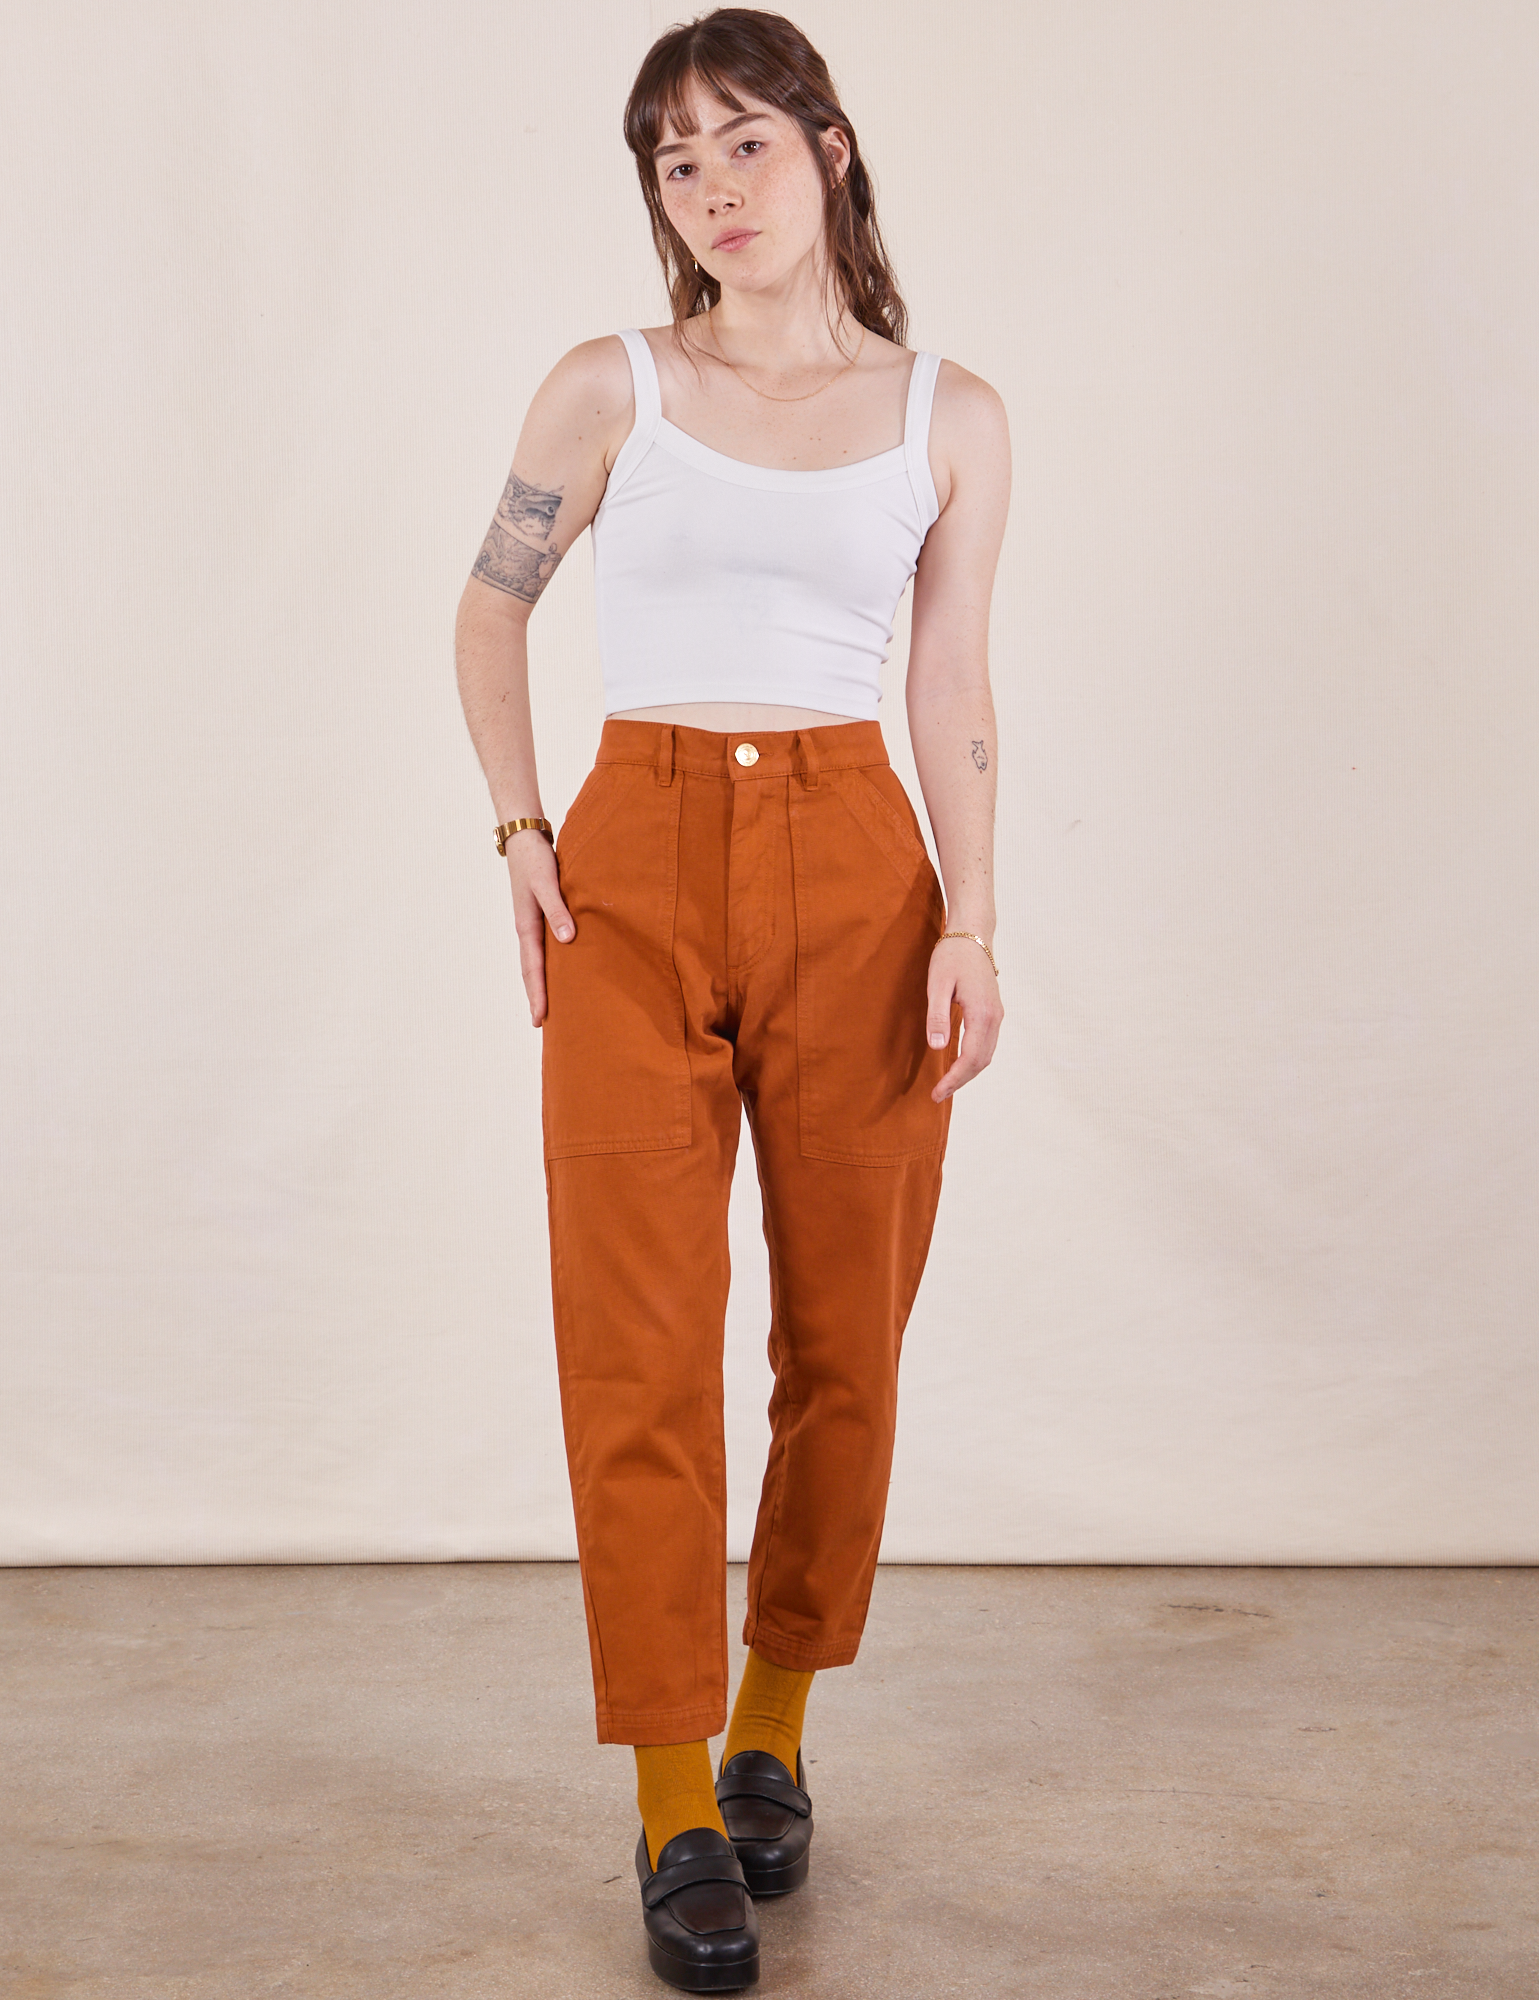 Hana is 5&#39;3&quot; and wearing XXS Petite Pencil Pants in Burnt Terracotta paired with vintage off-white Cropped Cami